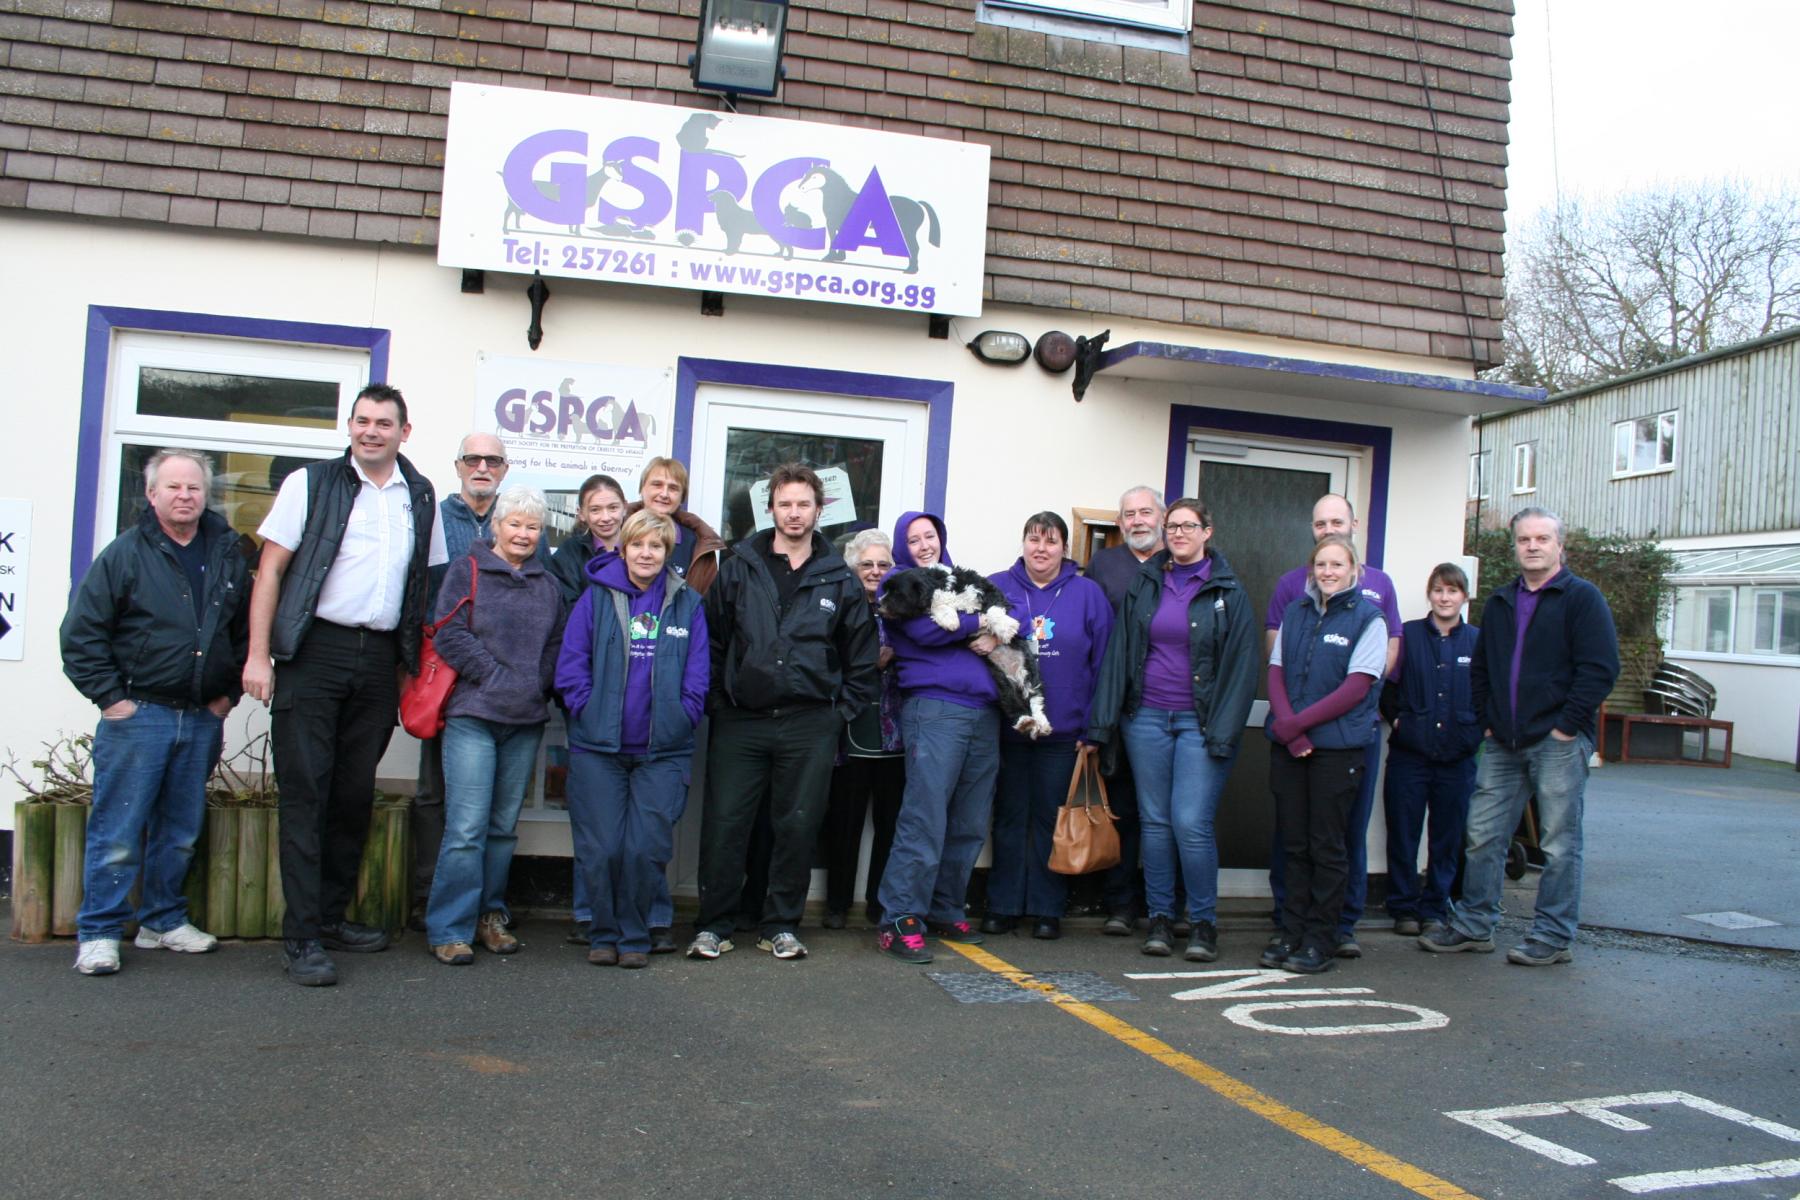 GSPCA staff and volunteers 2015 in Guernsey